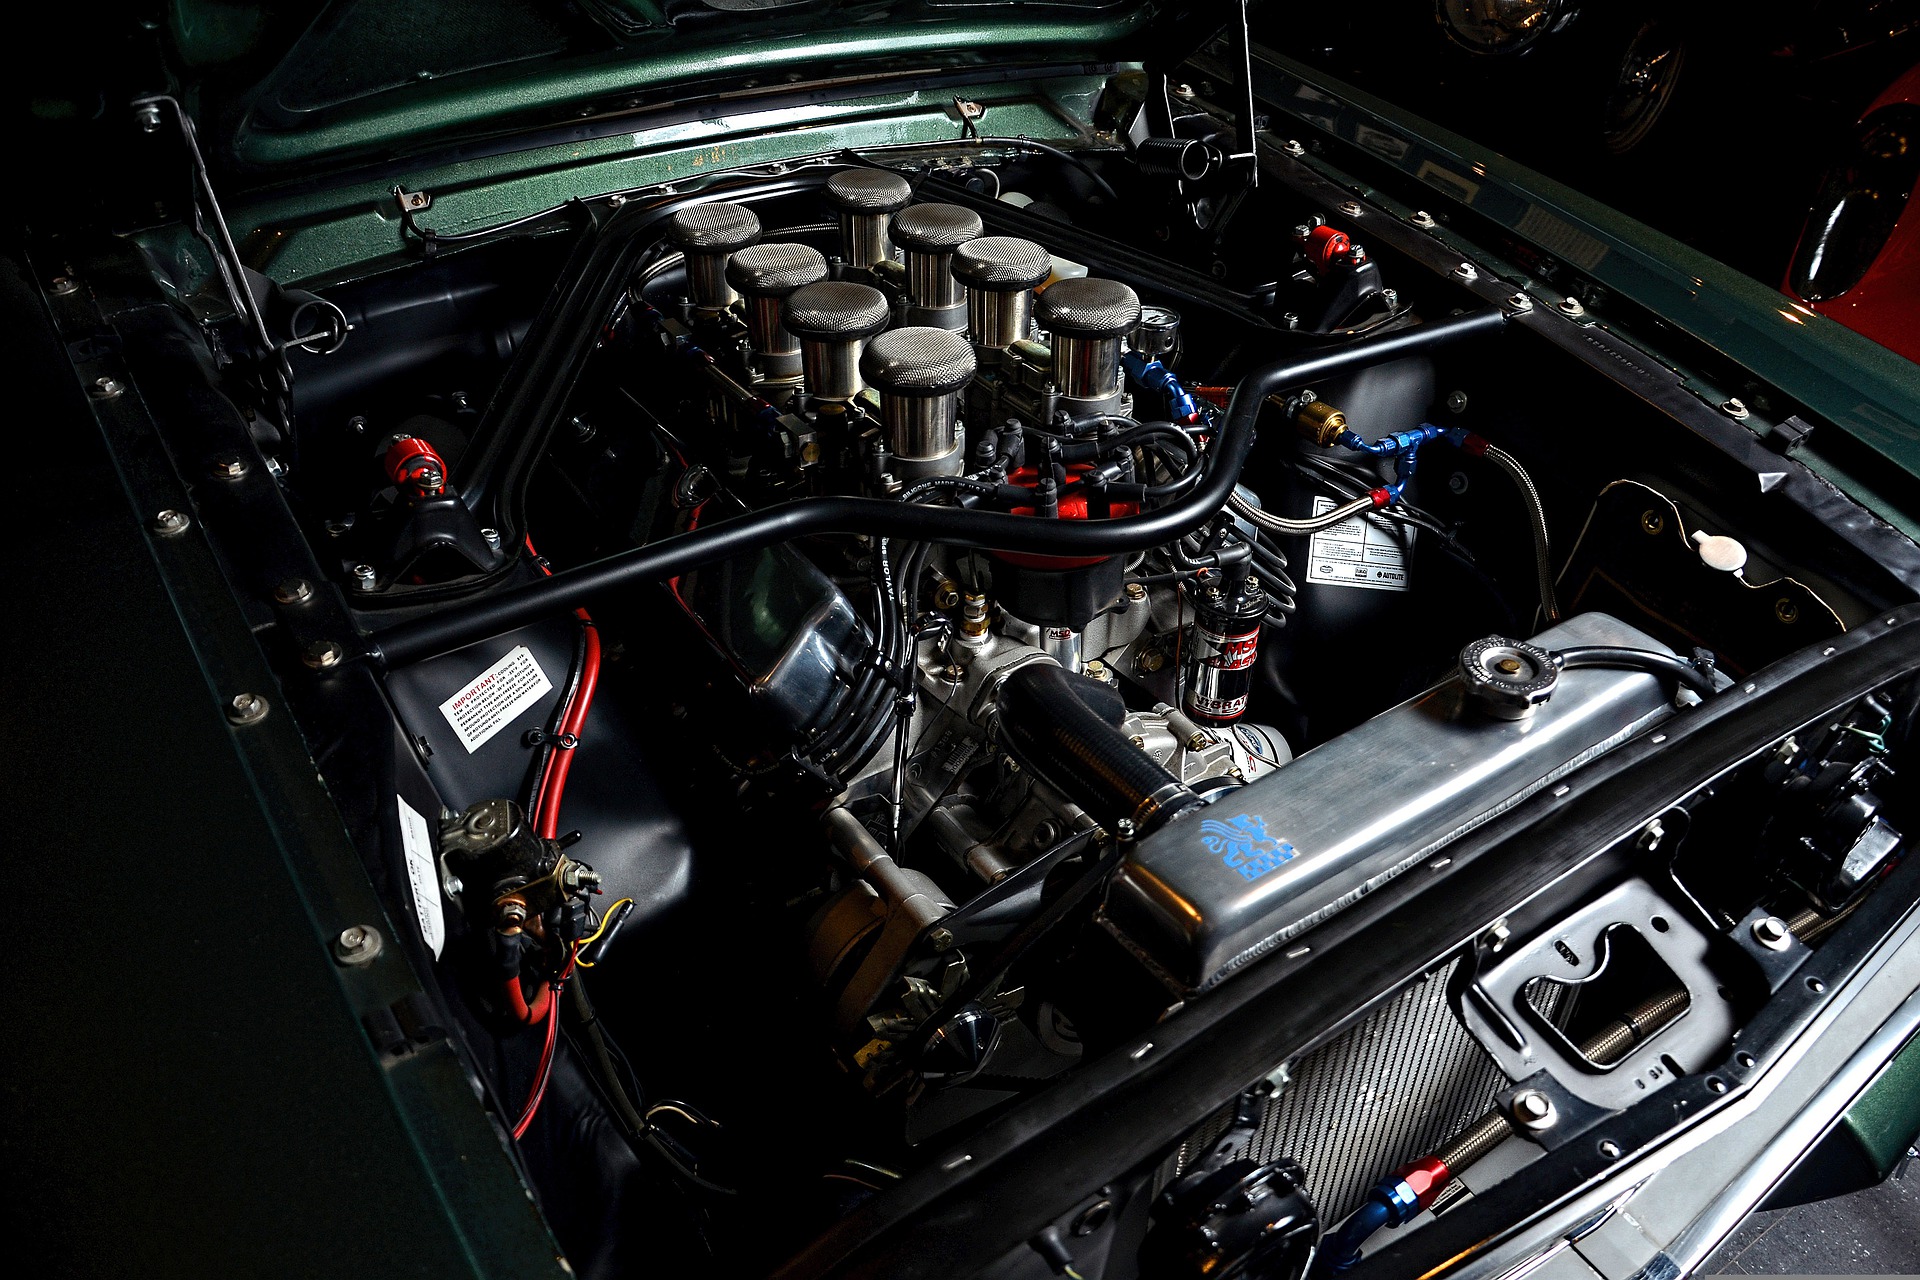 The engine of a Ford Mustang